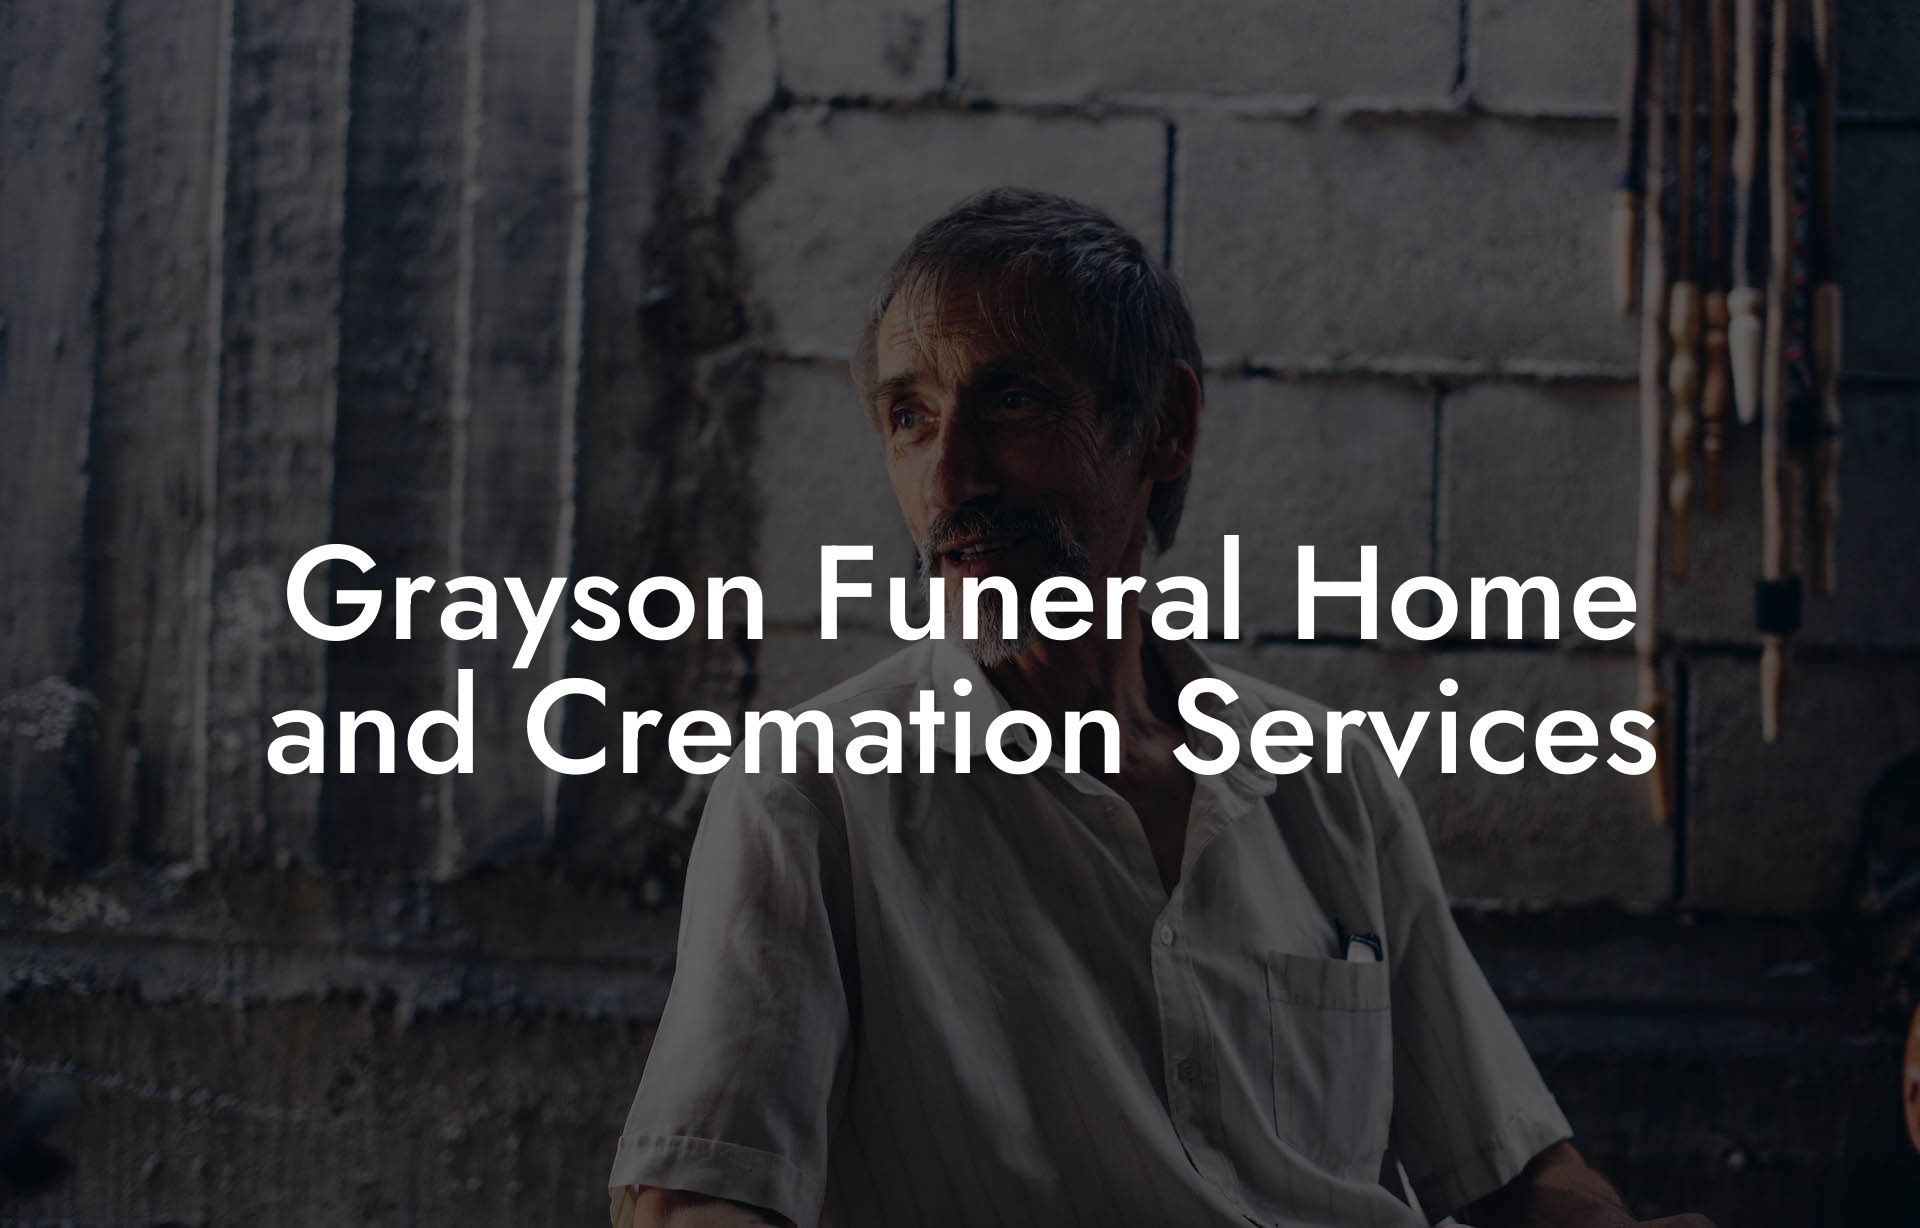 Grayson Funeral Home and Cremation Services